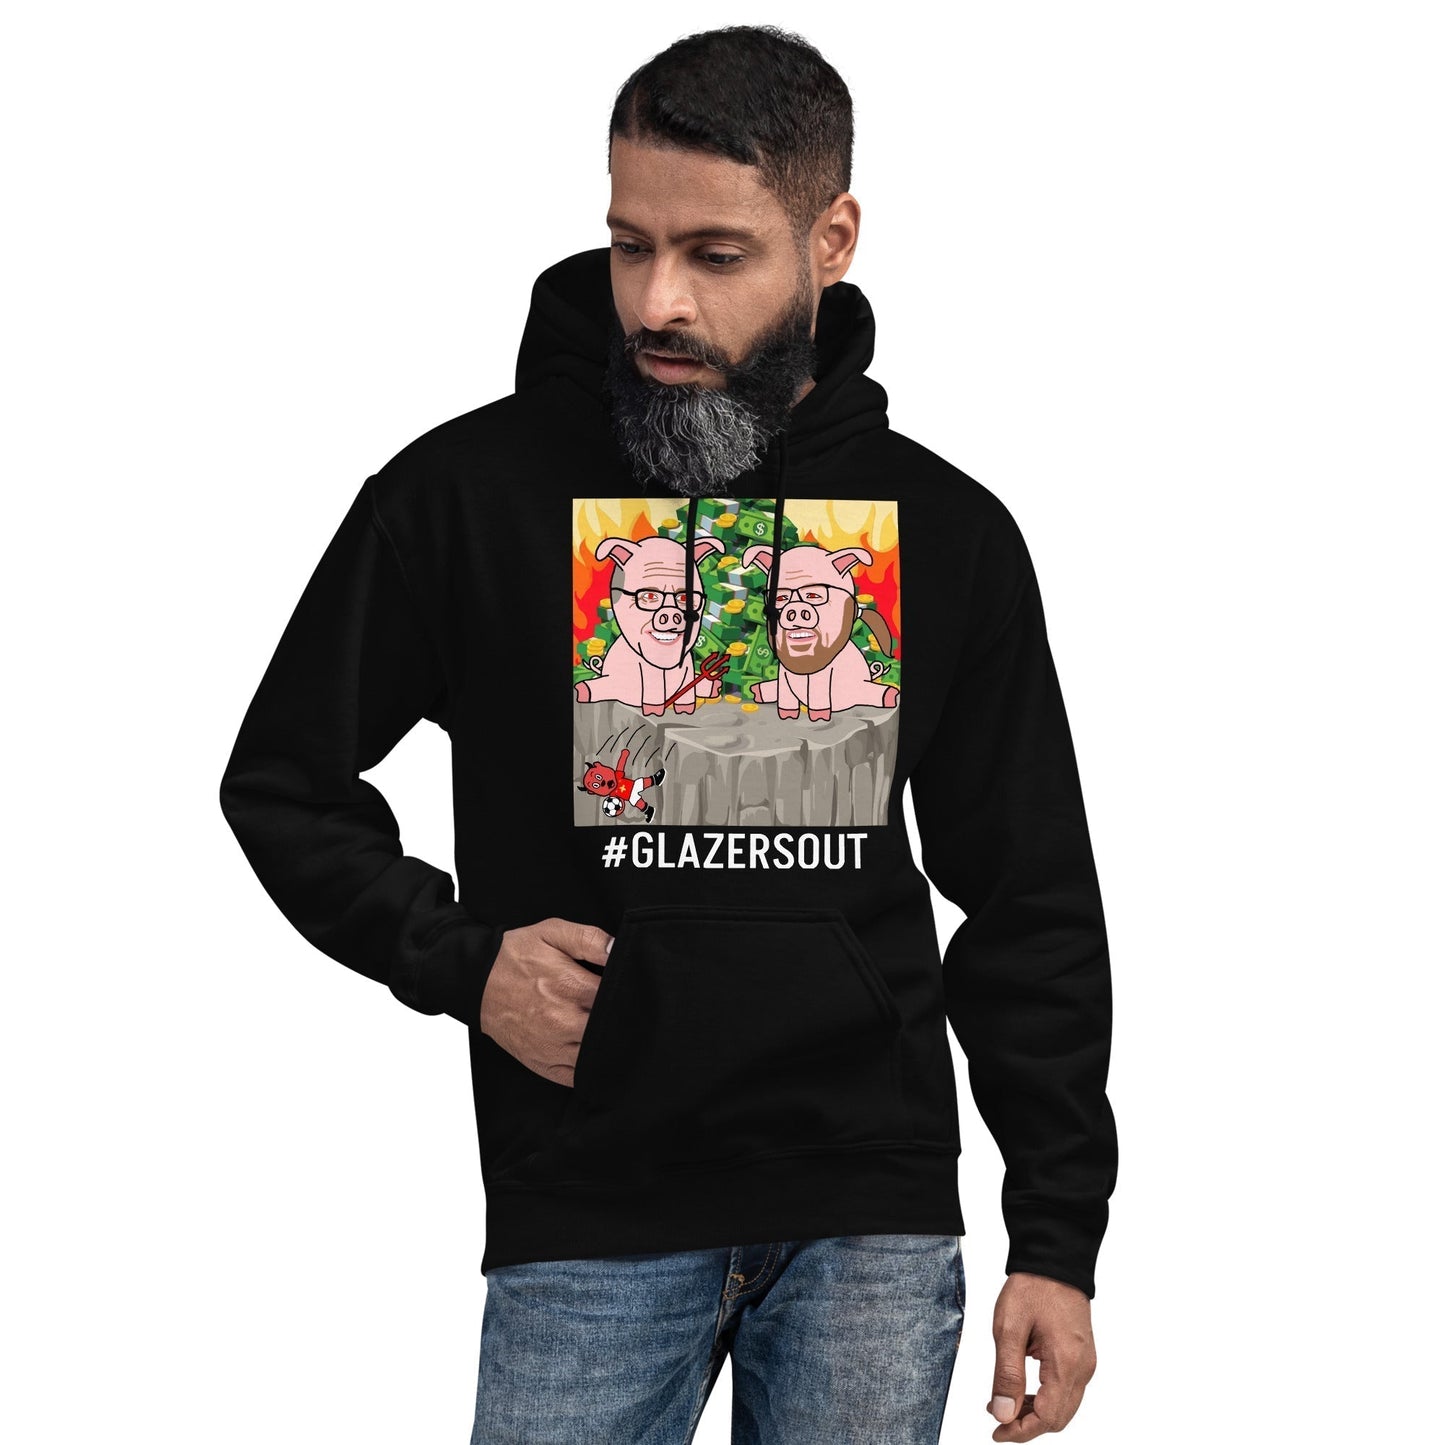 Glazers Out Manchester United Unisex Hoodie, White Letters, #GlazersOut Next Cult Brand Football, GlazersOut, Manchester United